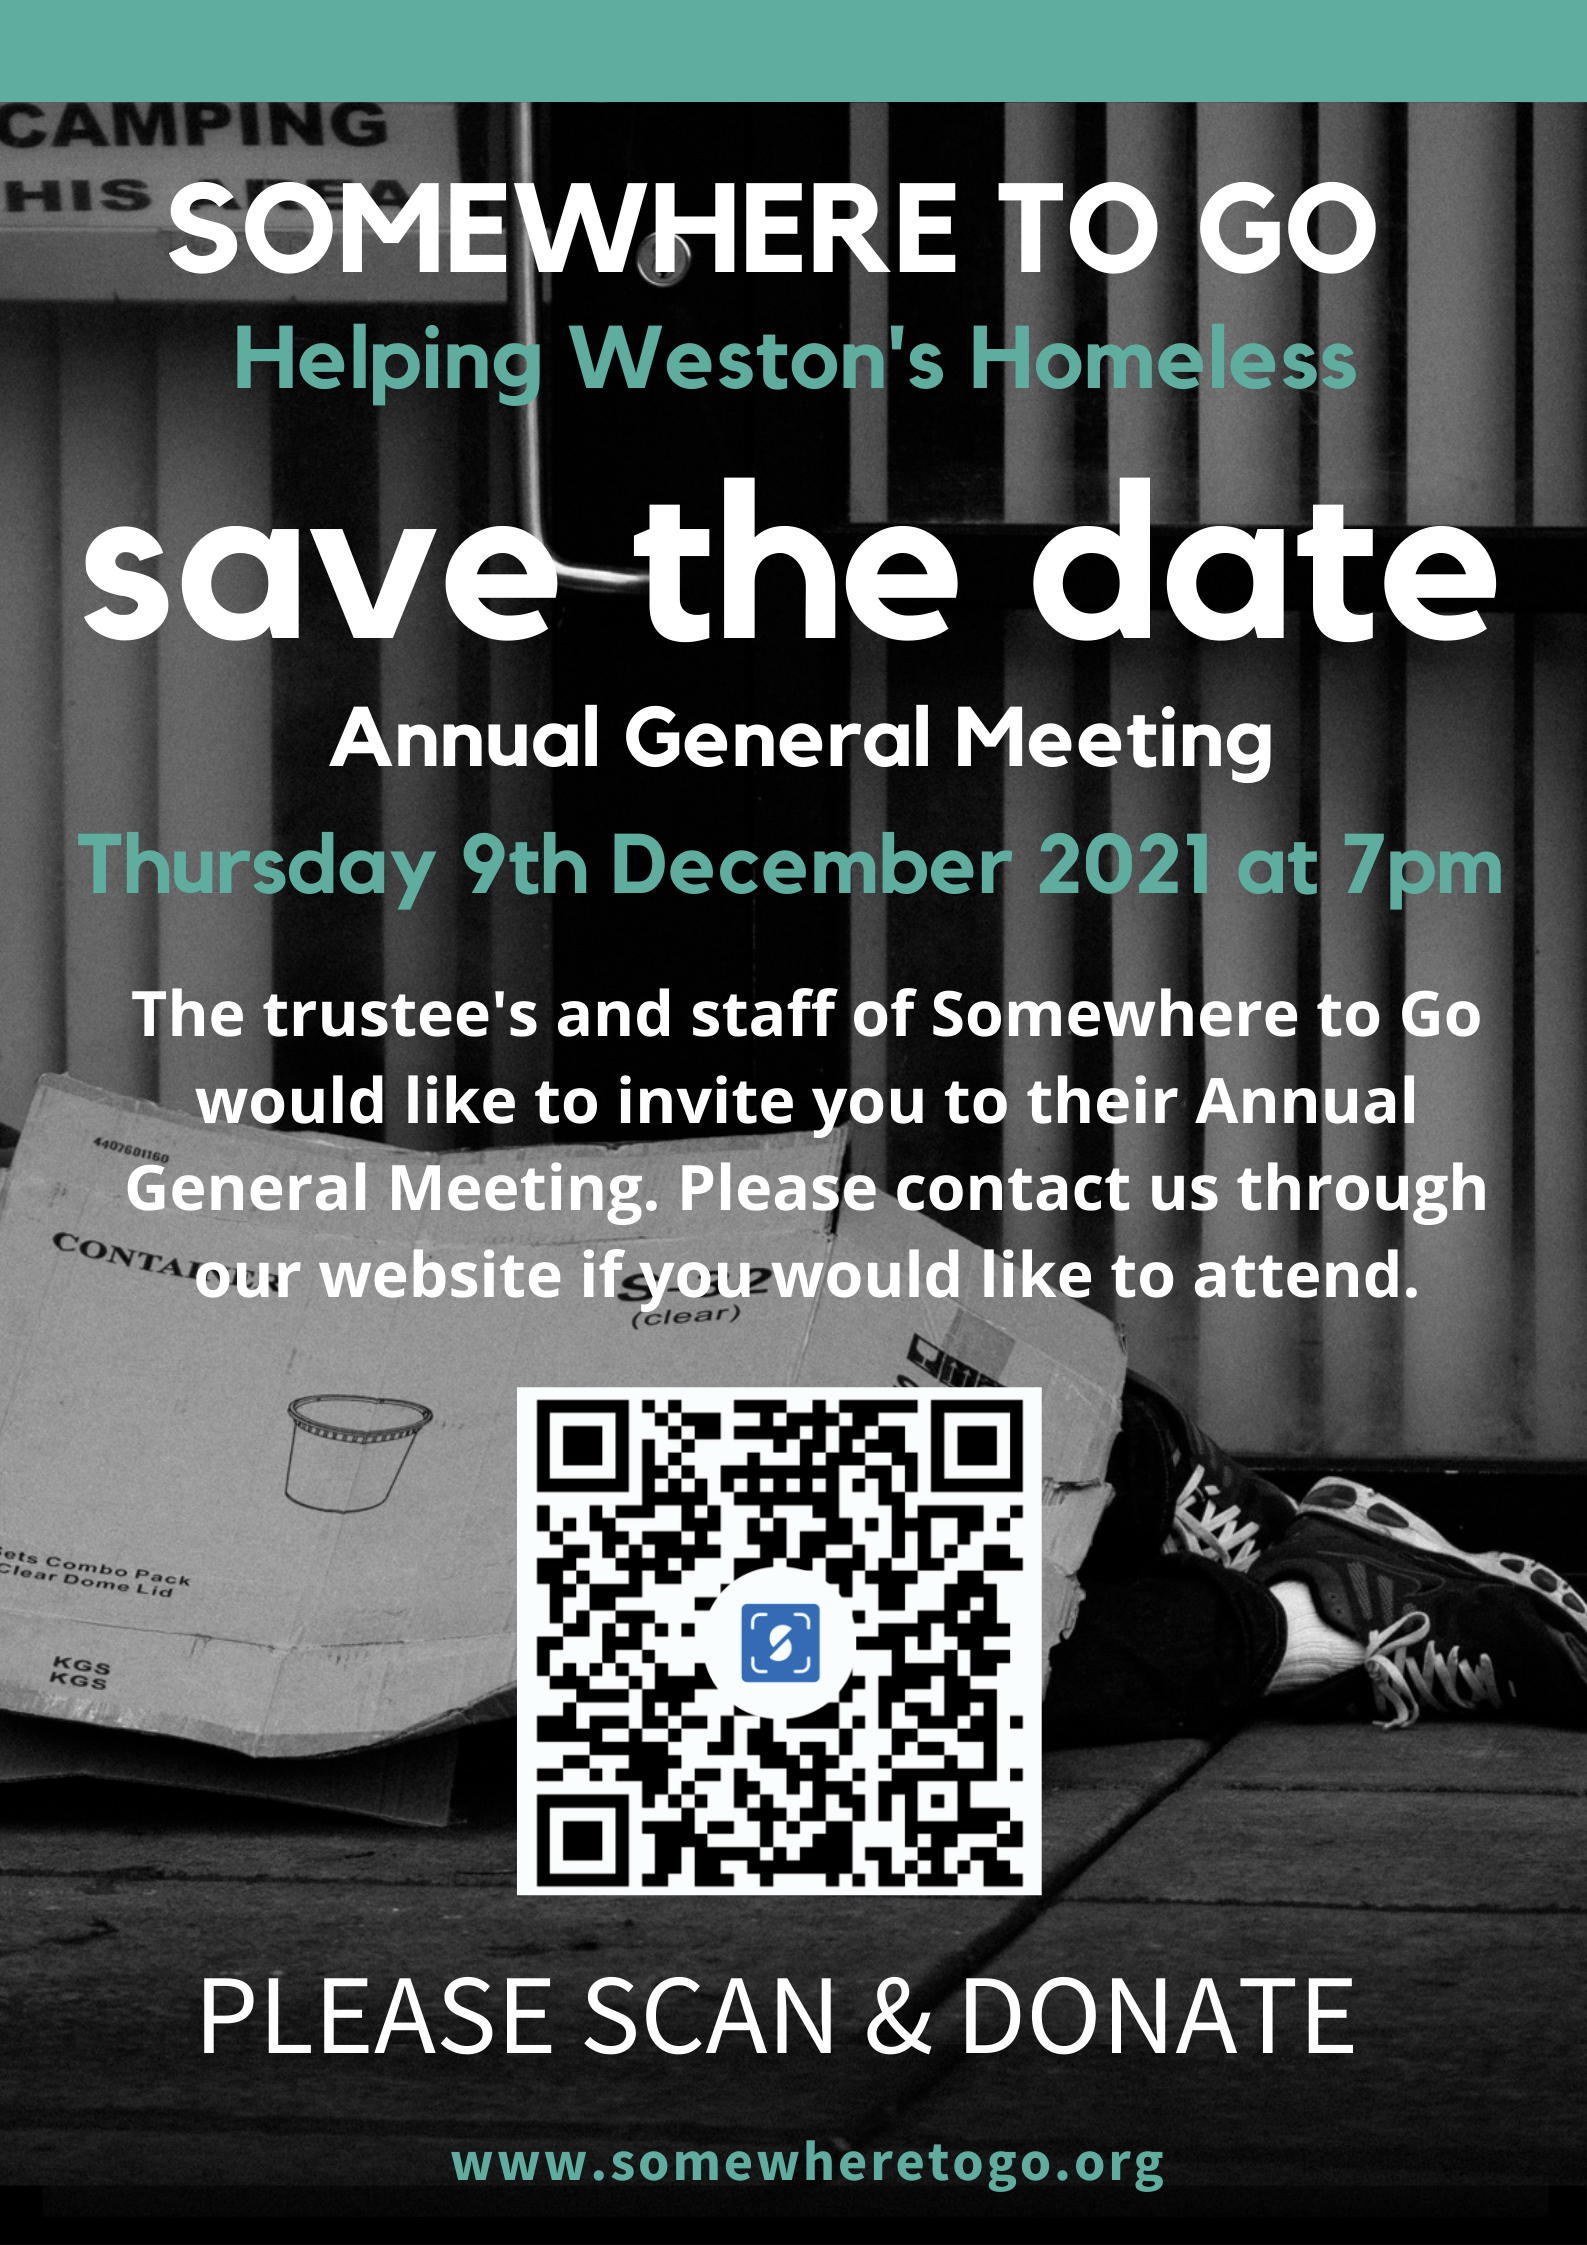 Notice of Annual General Meeting – Thursday 9th December 2021 at 7pm